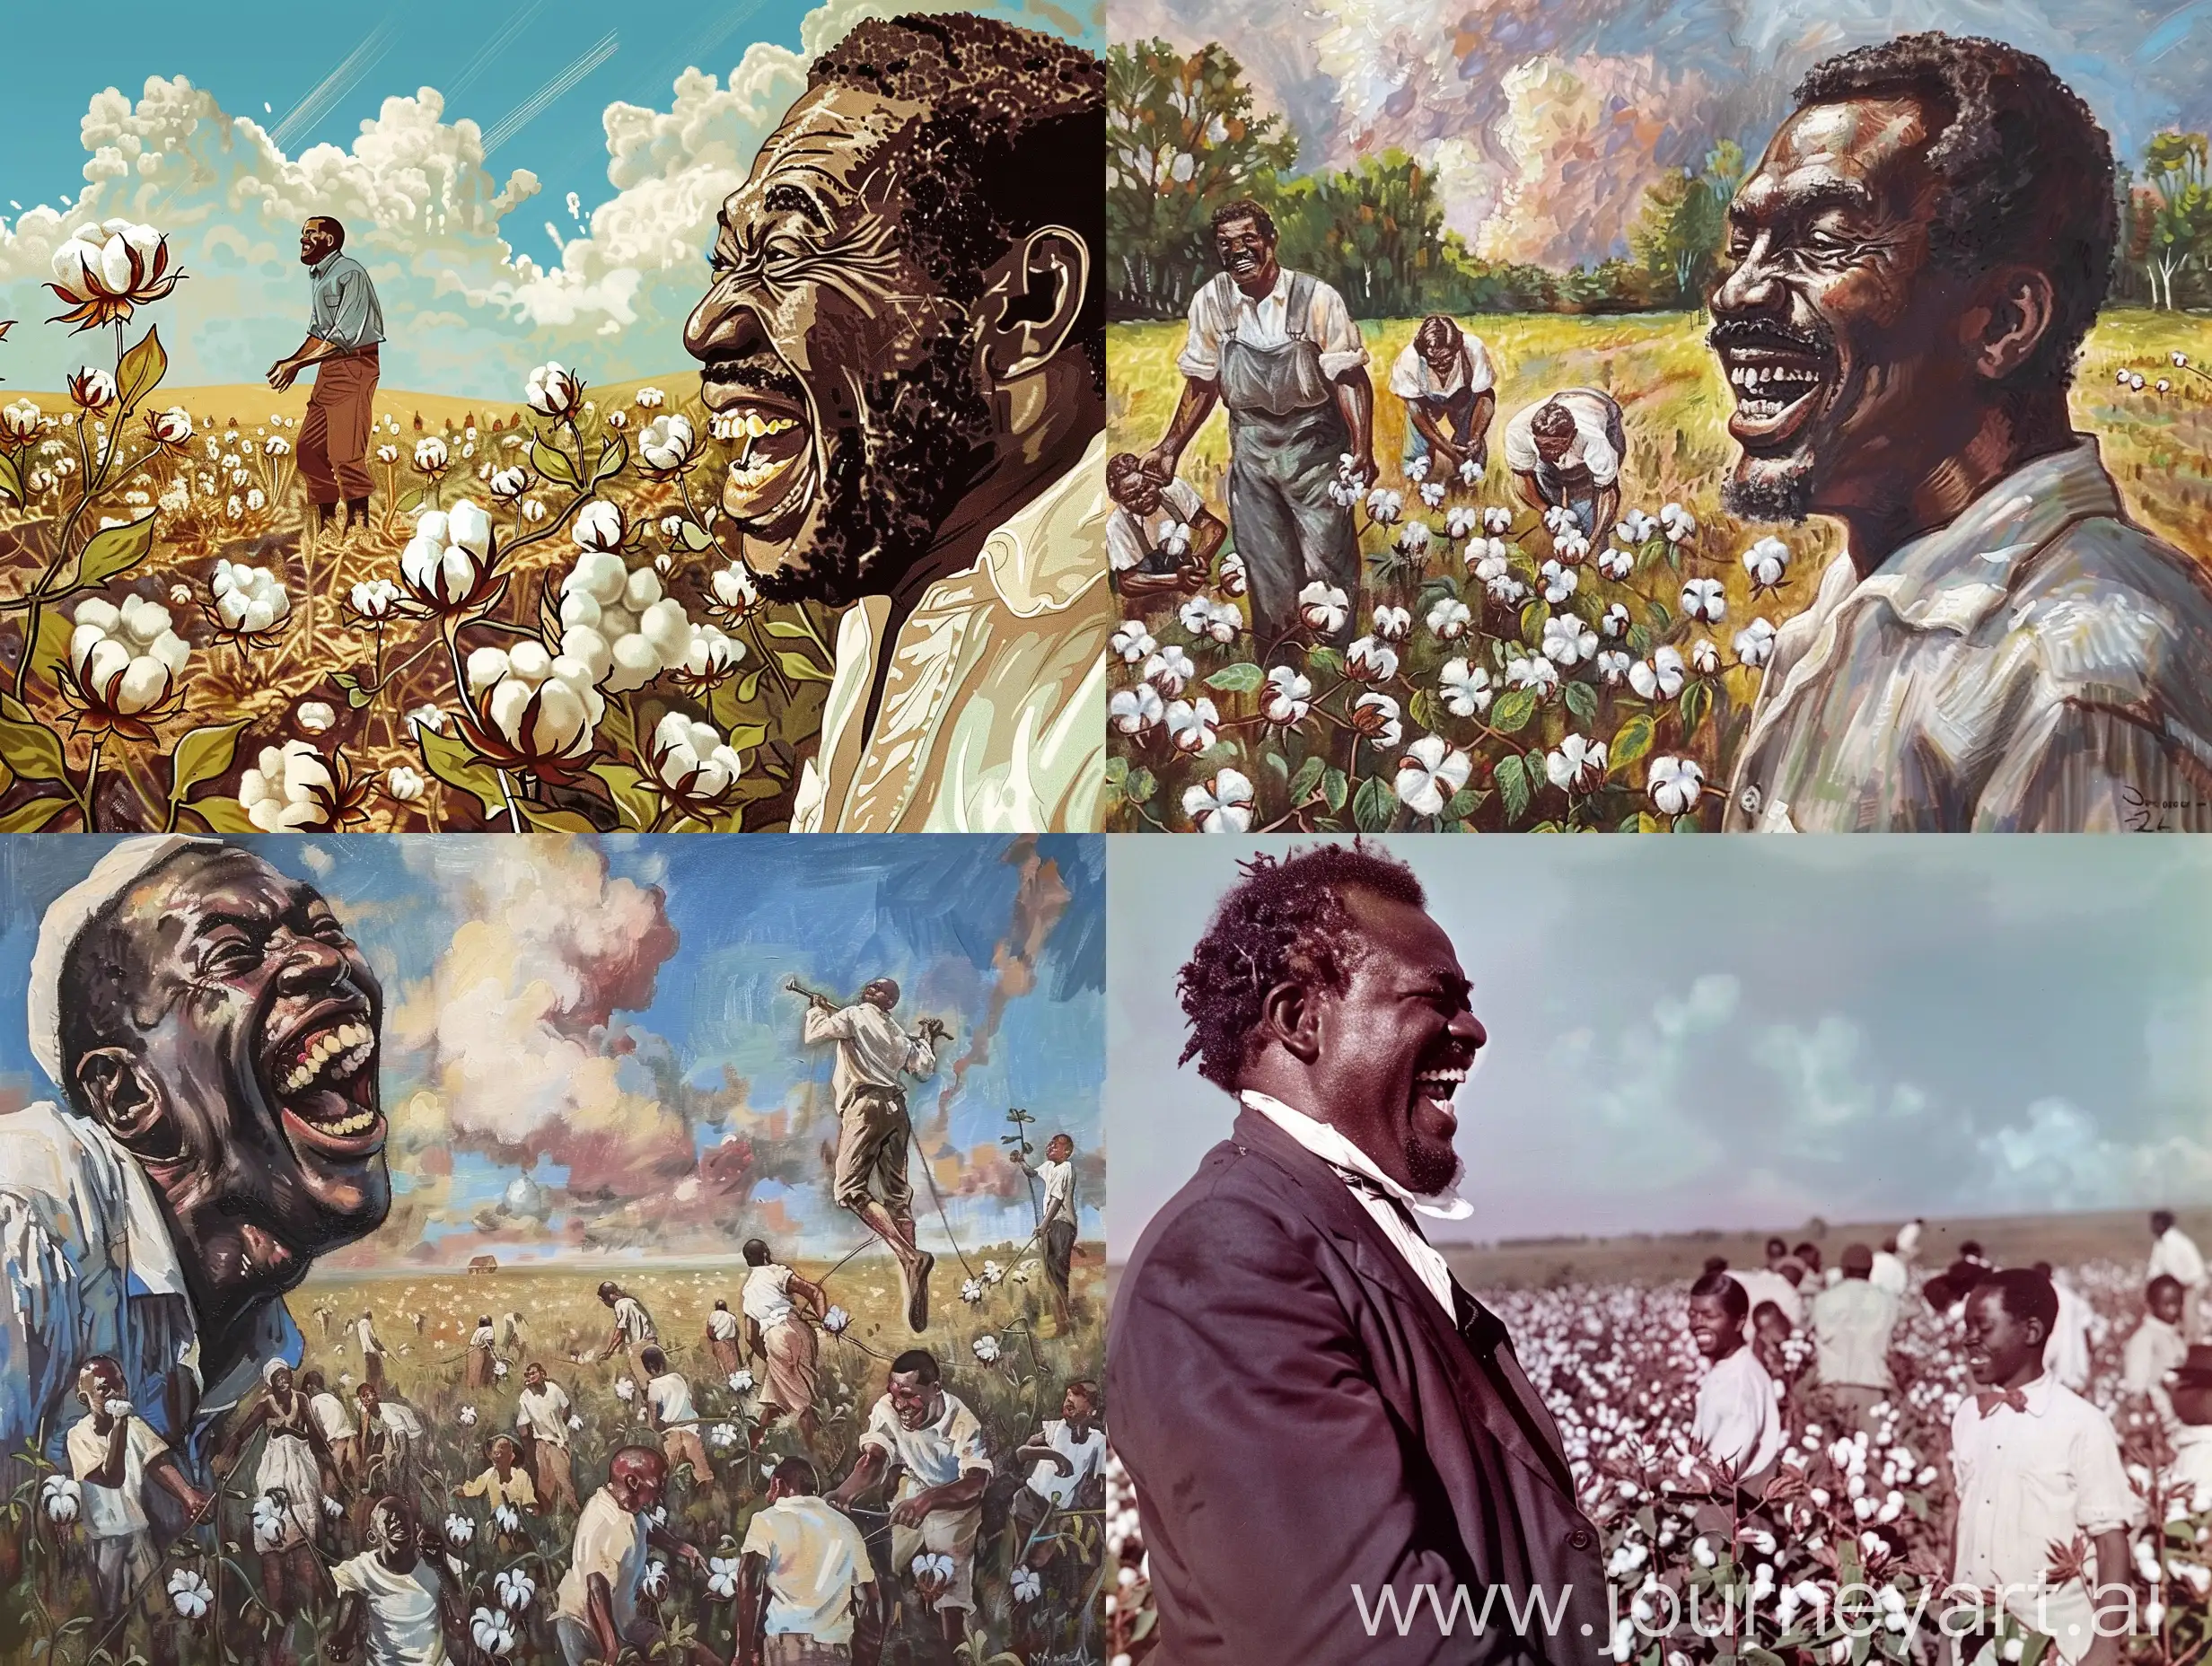 A black rich man laughs on white people who are picking cotton in field 